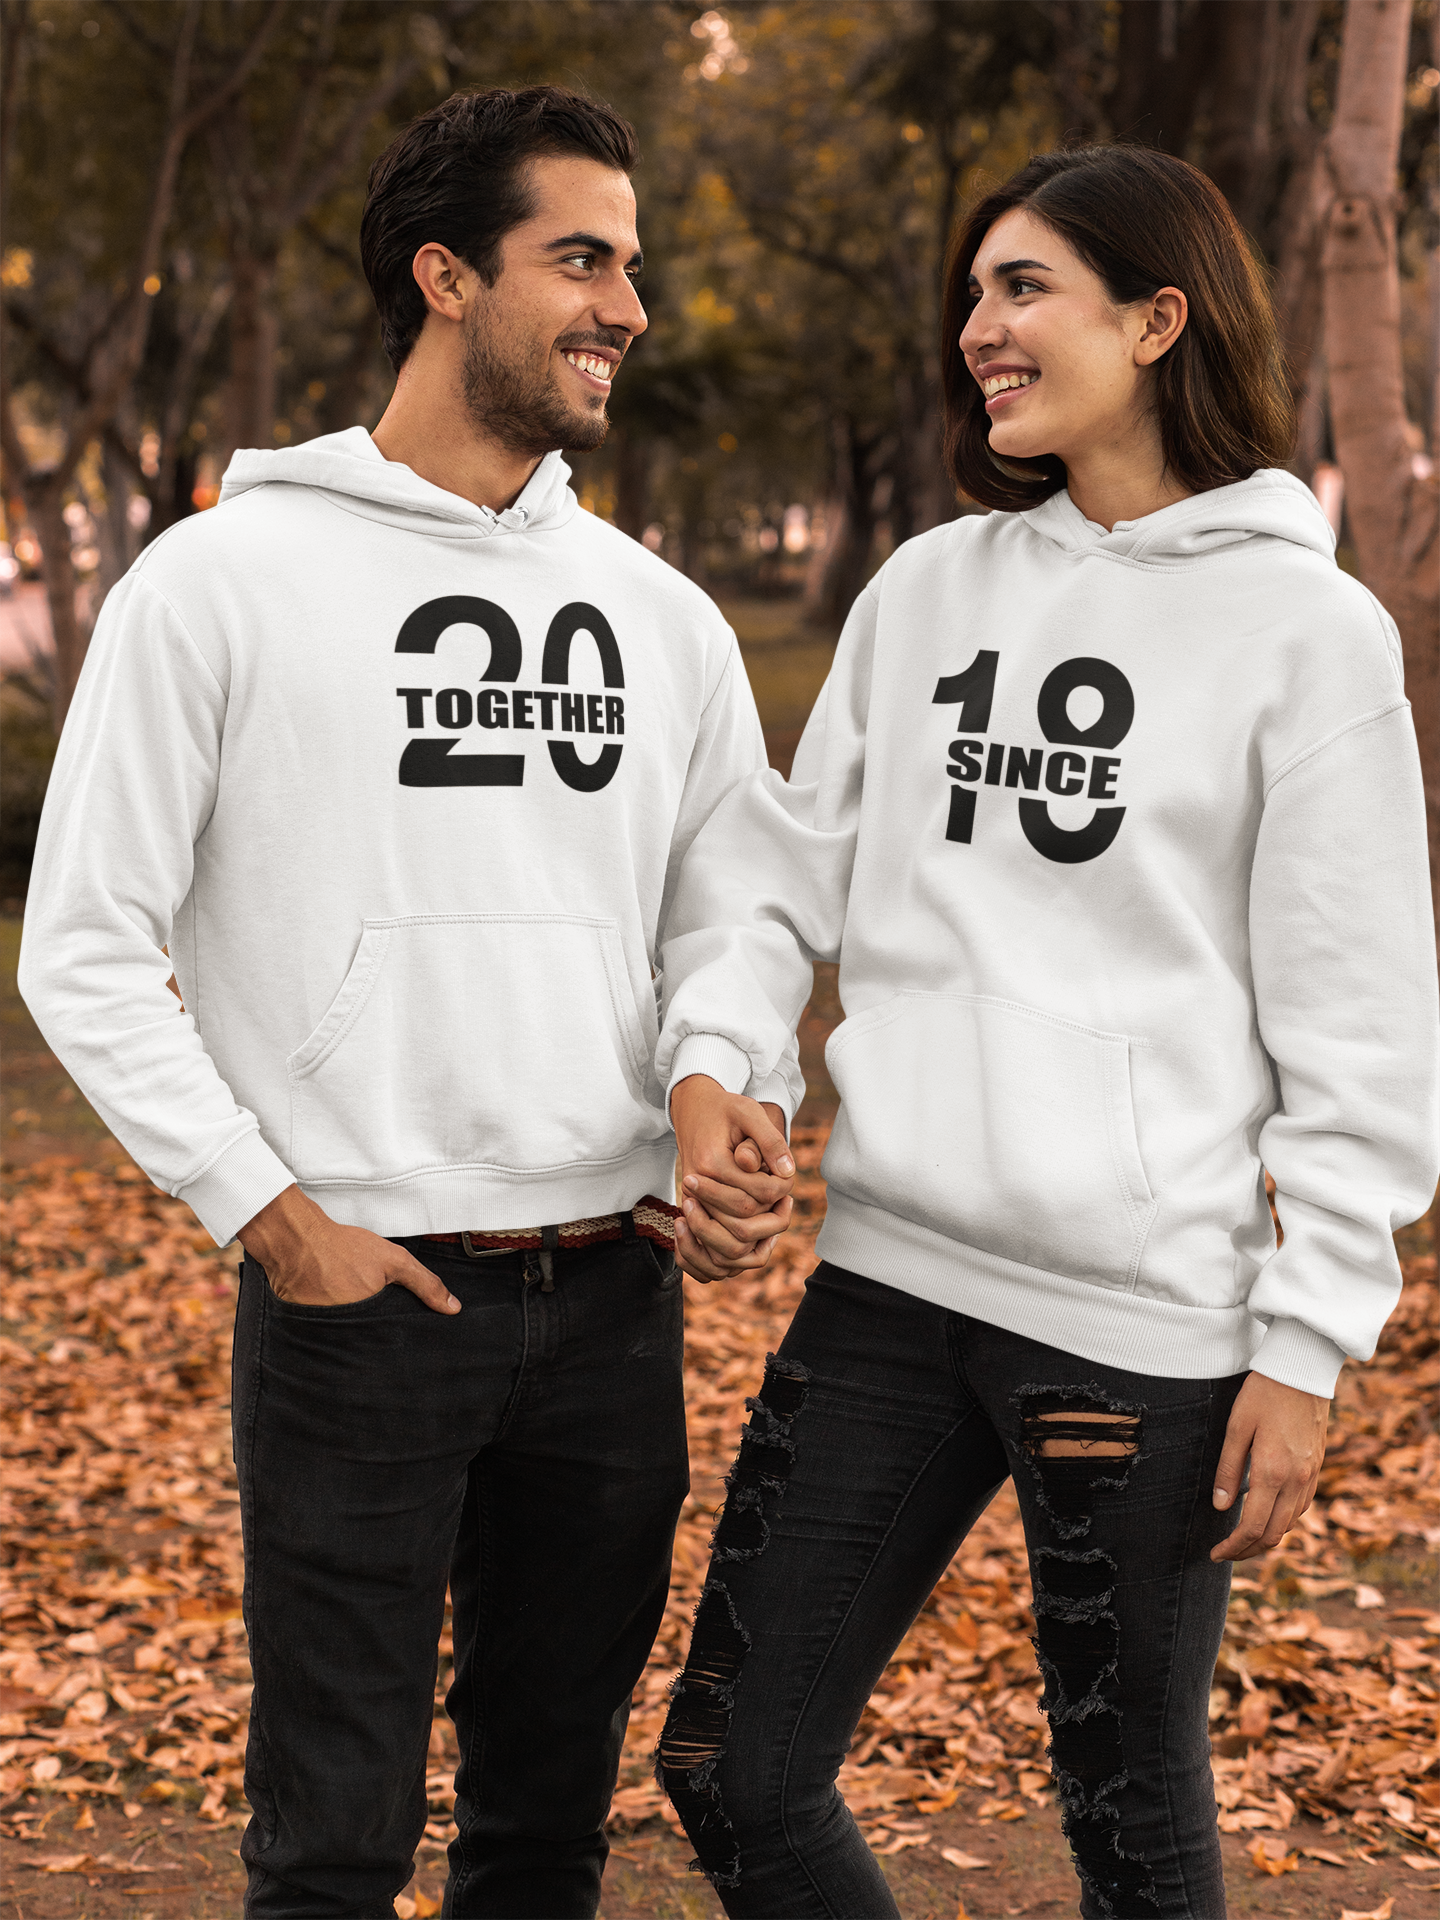 Together Since Couple Hoodie-FunkyTradtion